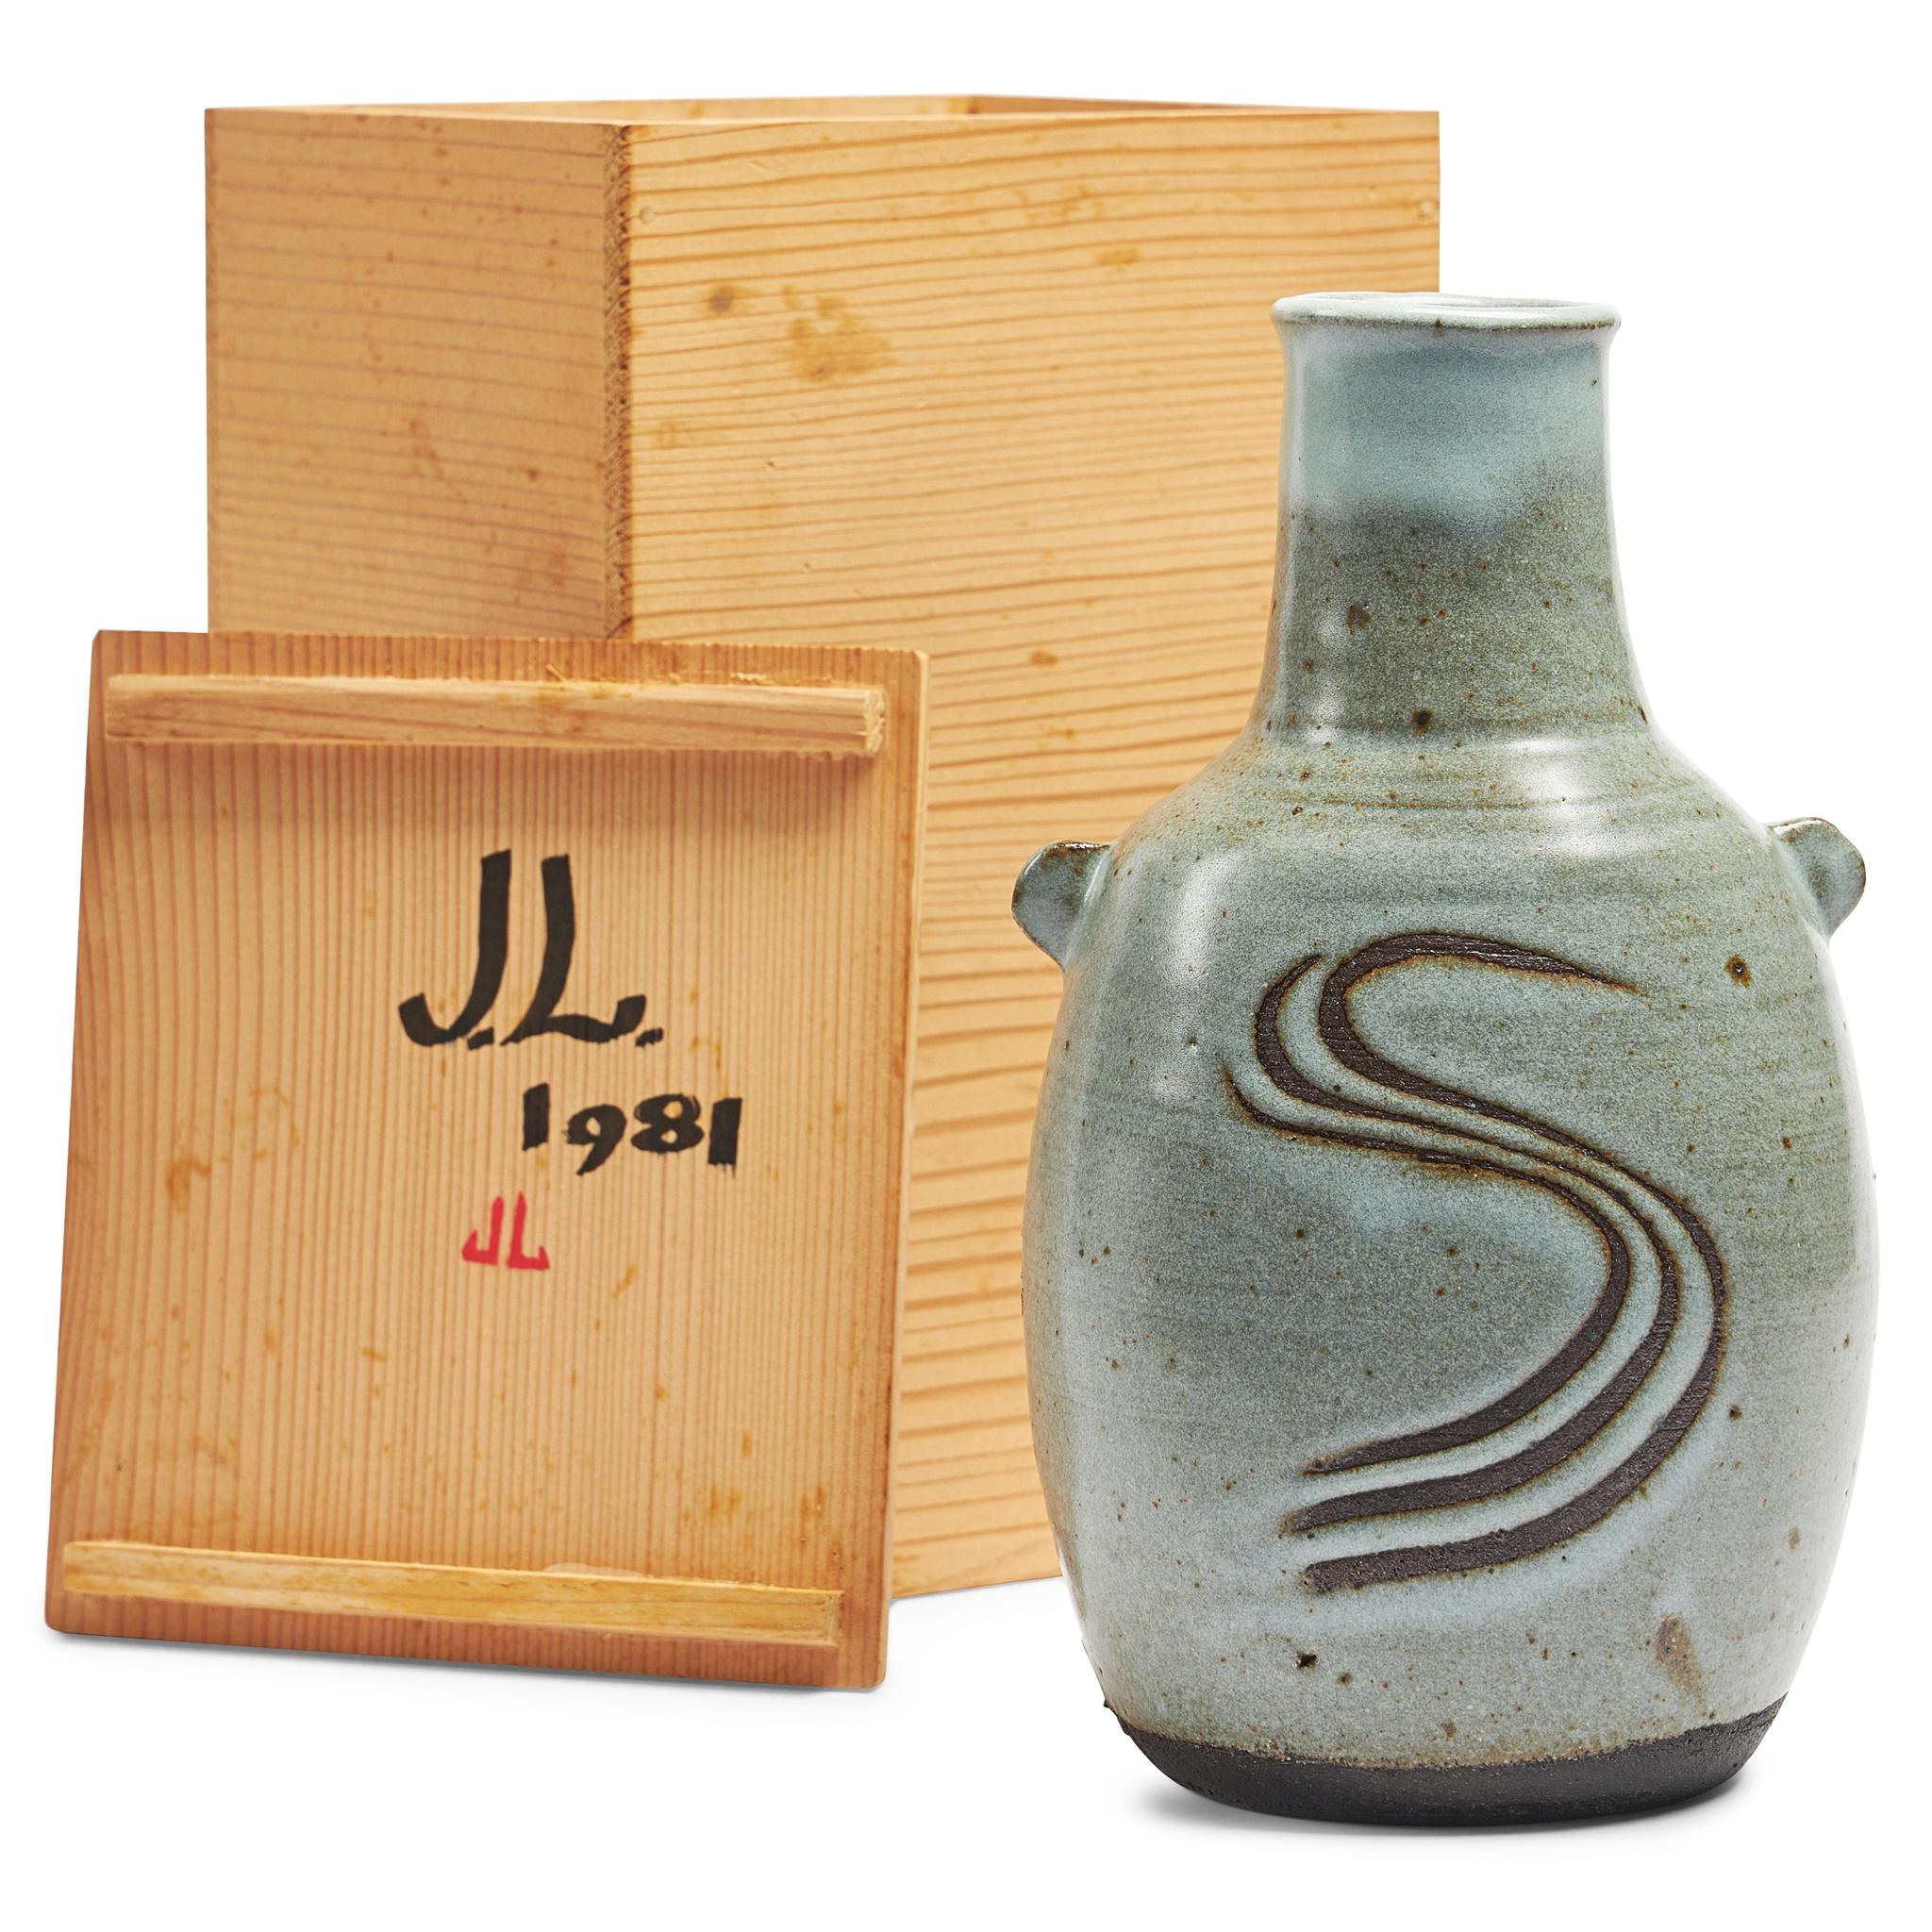 Japanese Style Ceramic Vase with Lugs by Janet Leach '1981' For Sale 13